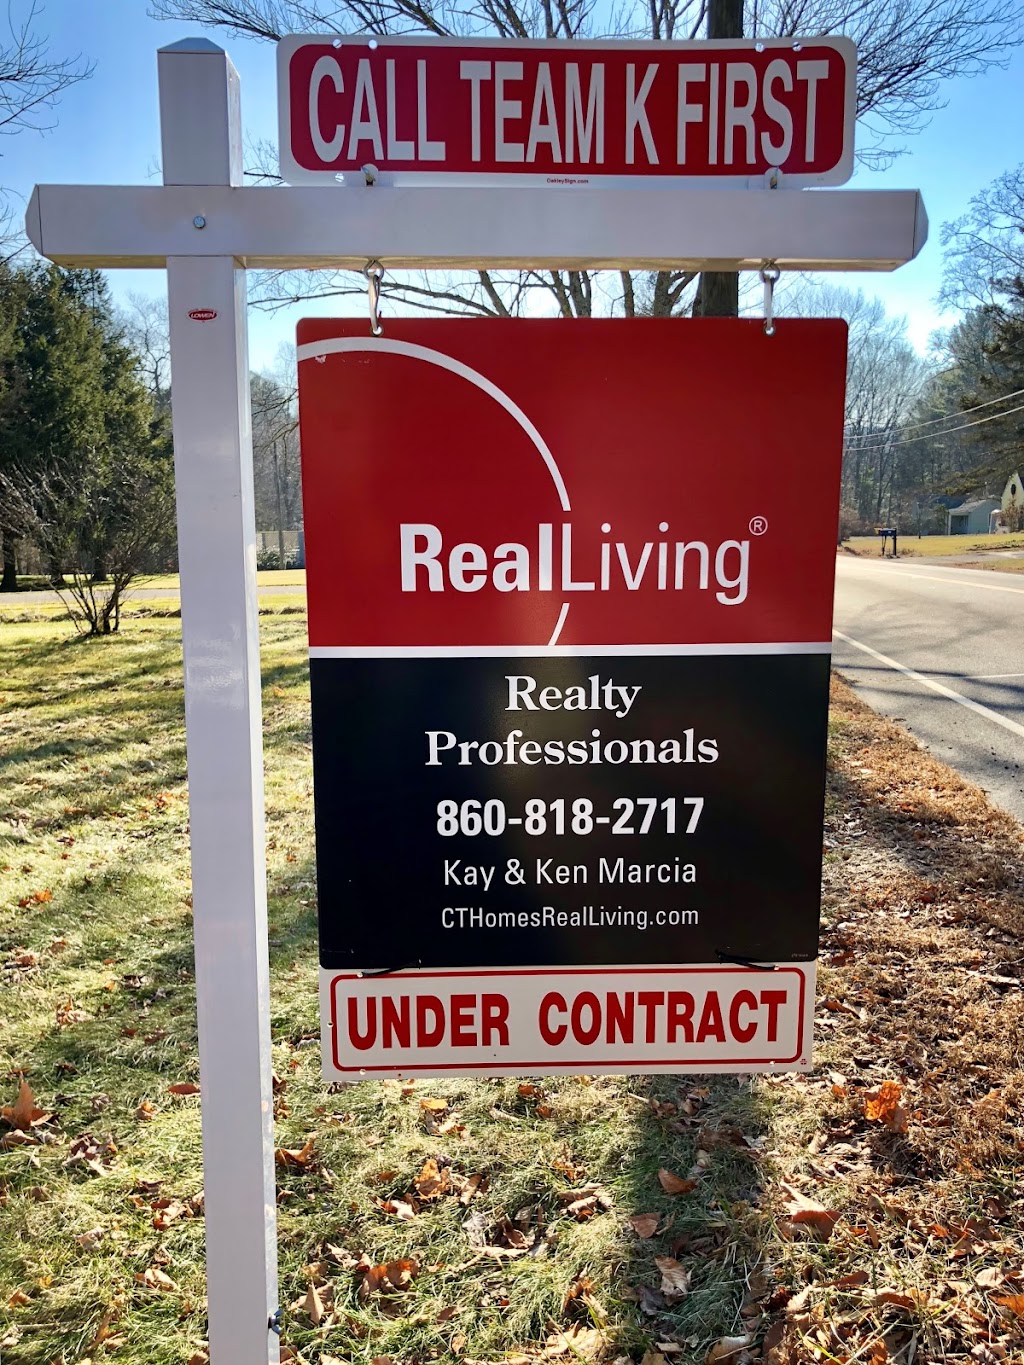 Team K Real Estate: Real Living Realty Professionals | 443 Shaker Rd Unit D, East Longmeadow, MA 01028 | Phone: (860) 966-3392